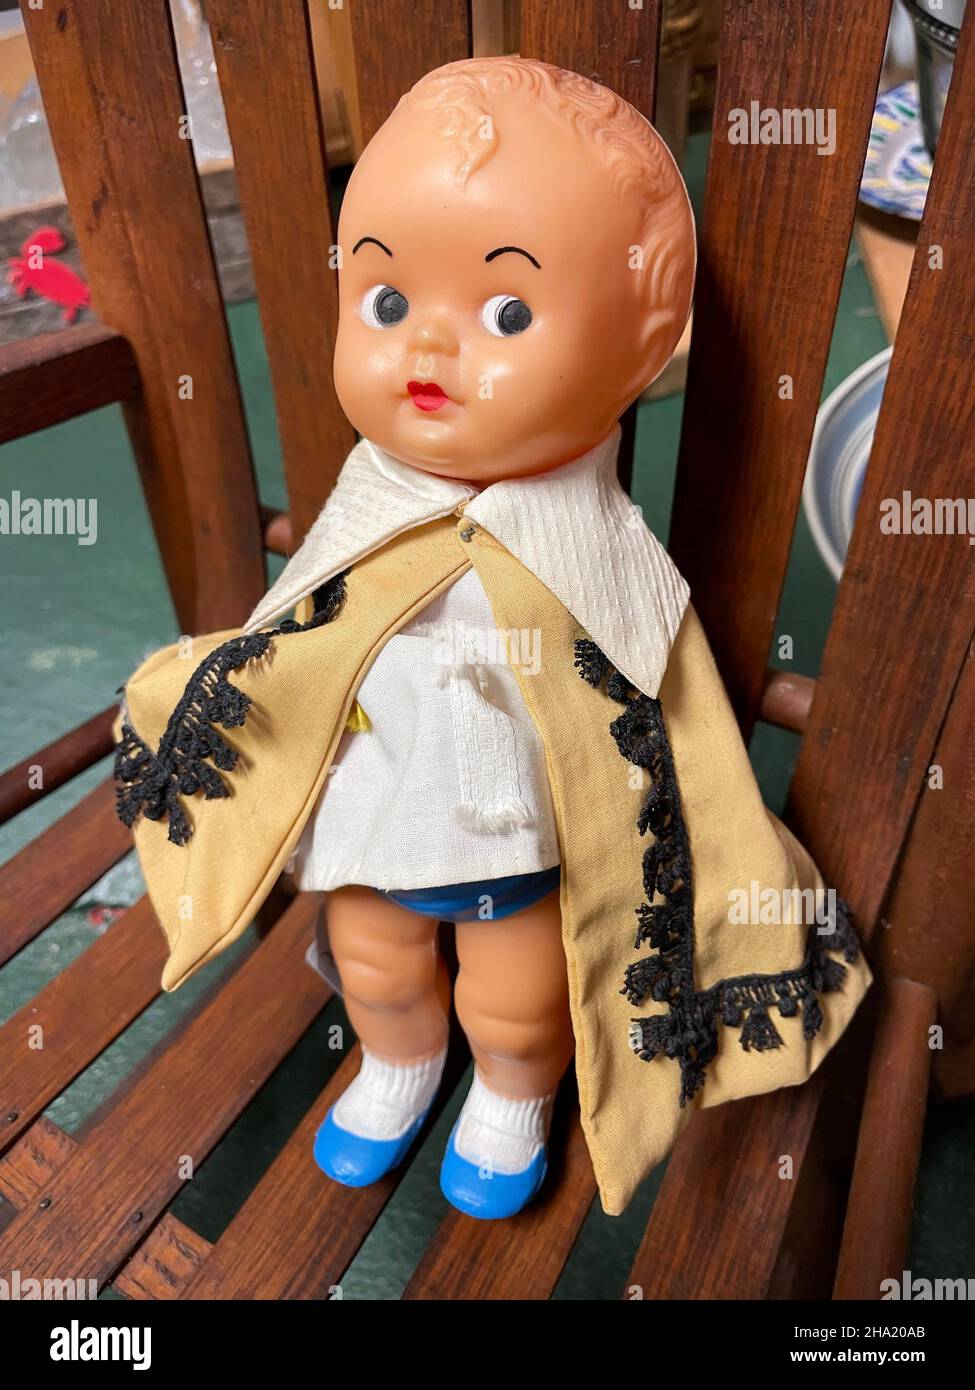 A vintage molded plastic baby doll wearing blue shoes, a tan cape with lace trim, and an adorable suspicious expression on her face stands in a chair. Stock Photo